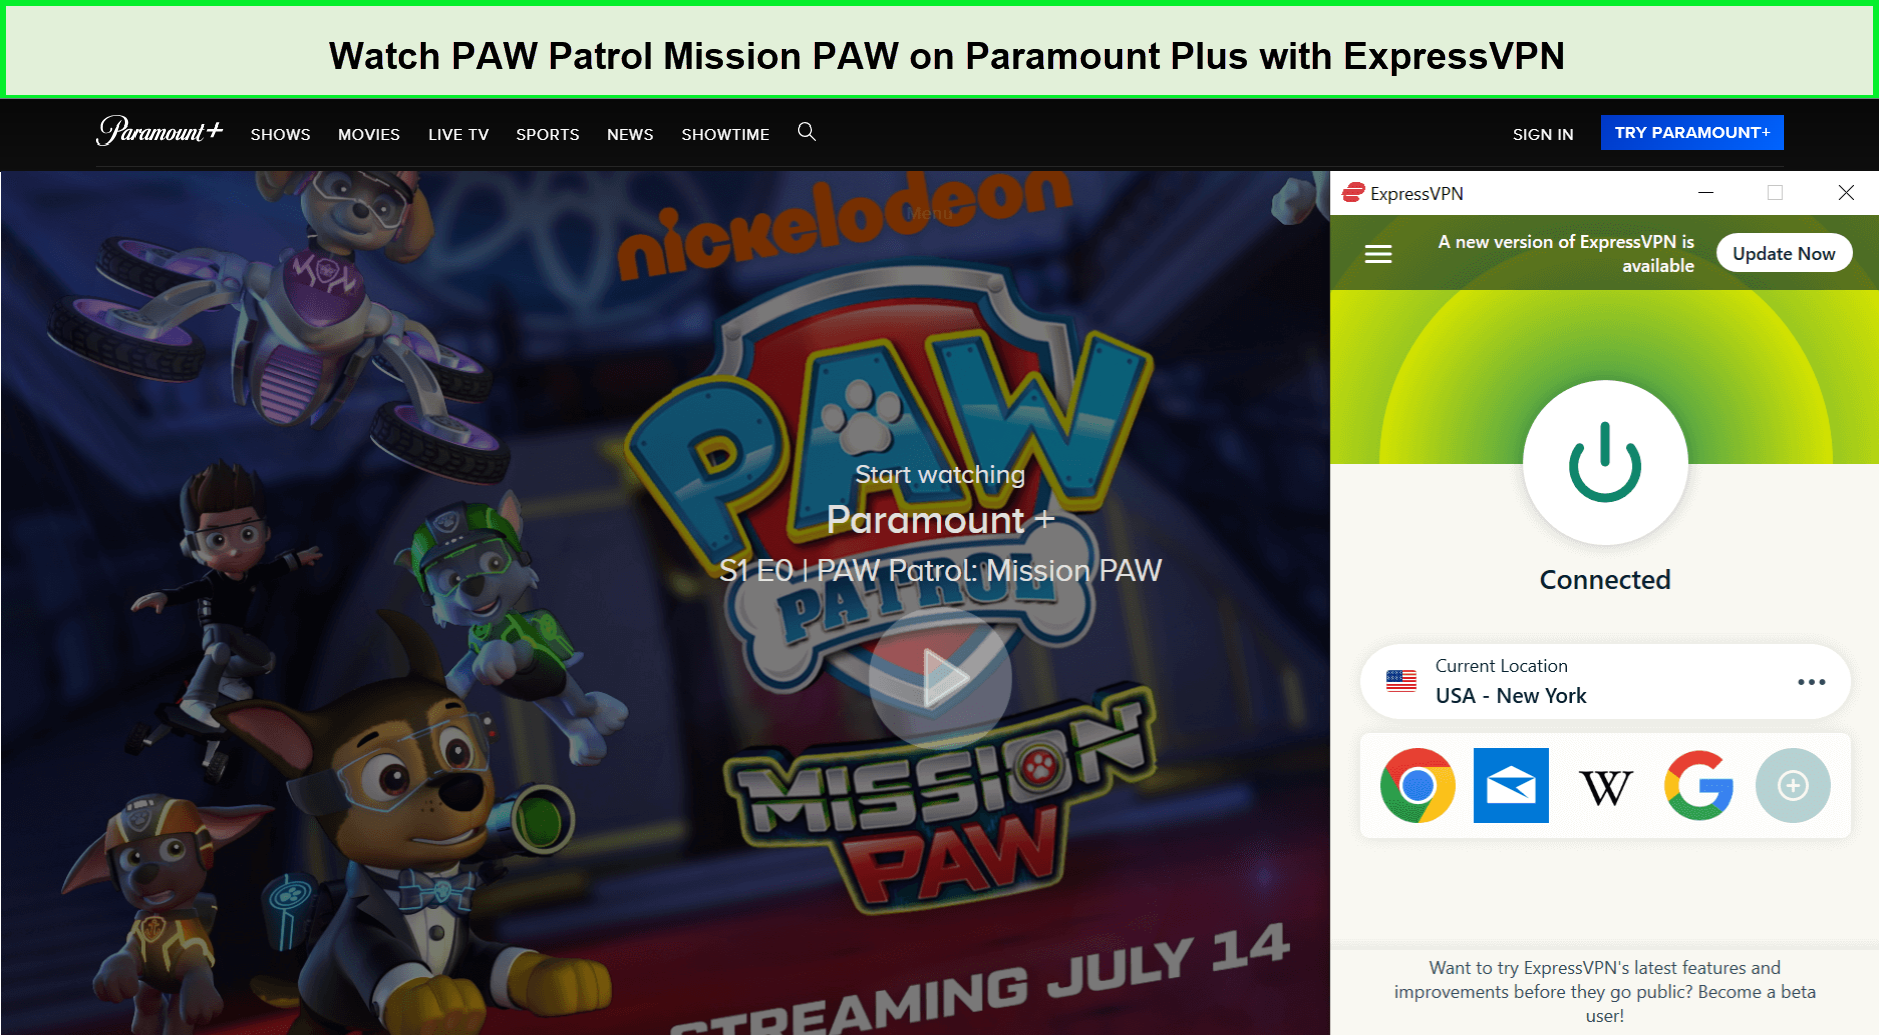 Watch-PAW-Patrol-Mission-PAW-in-Spain-on-Paramount-Plus-with-ExpressVPN